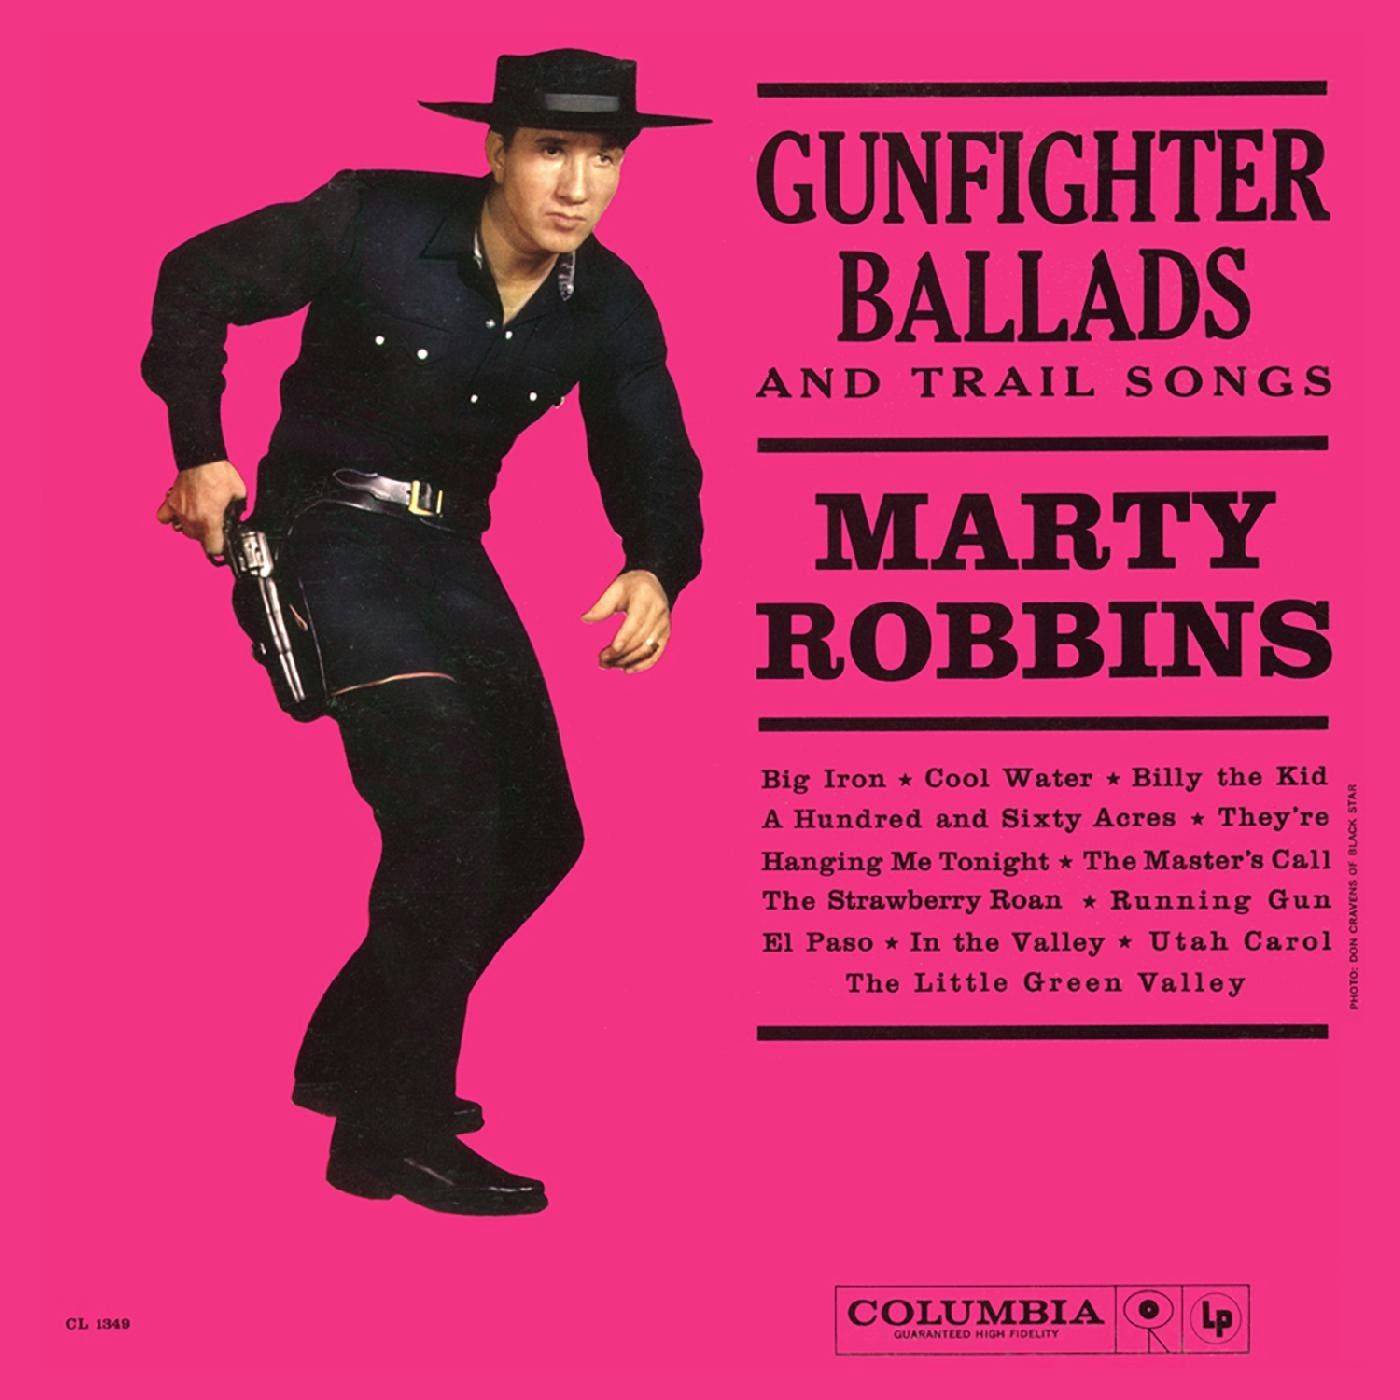 Album artwork for Album artwork for Gunfighter Ballads and Trail Songs by Marty Robbins by Gunfighter Ballads and Trail Songs - Marty Robbins